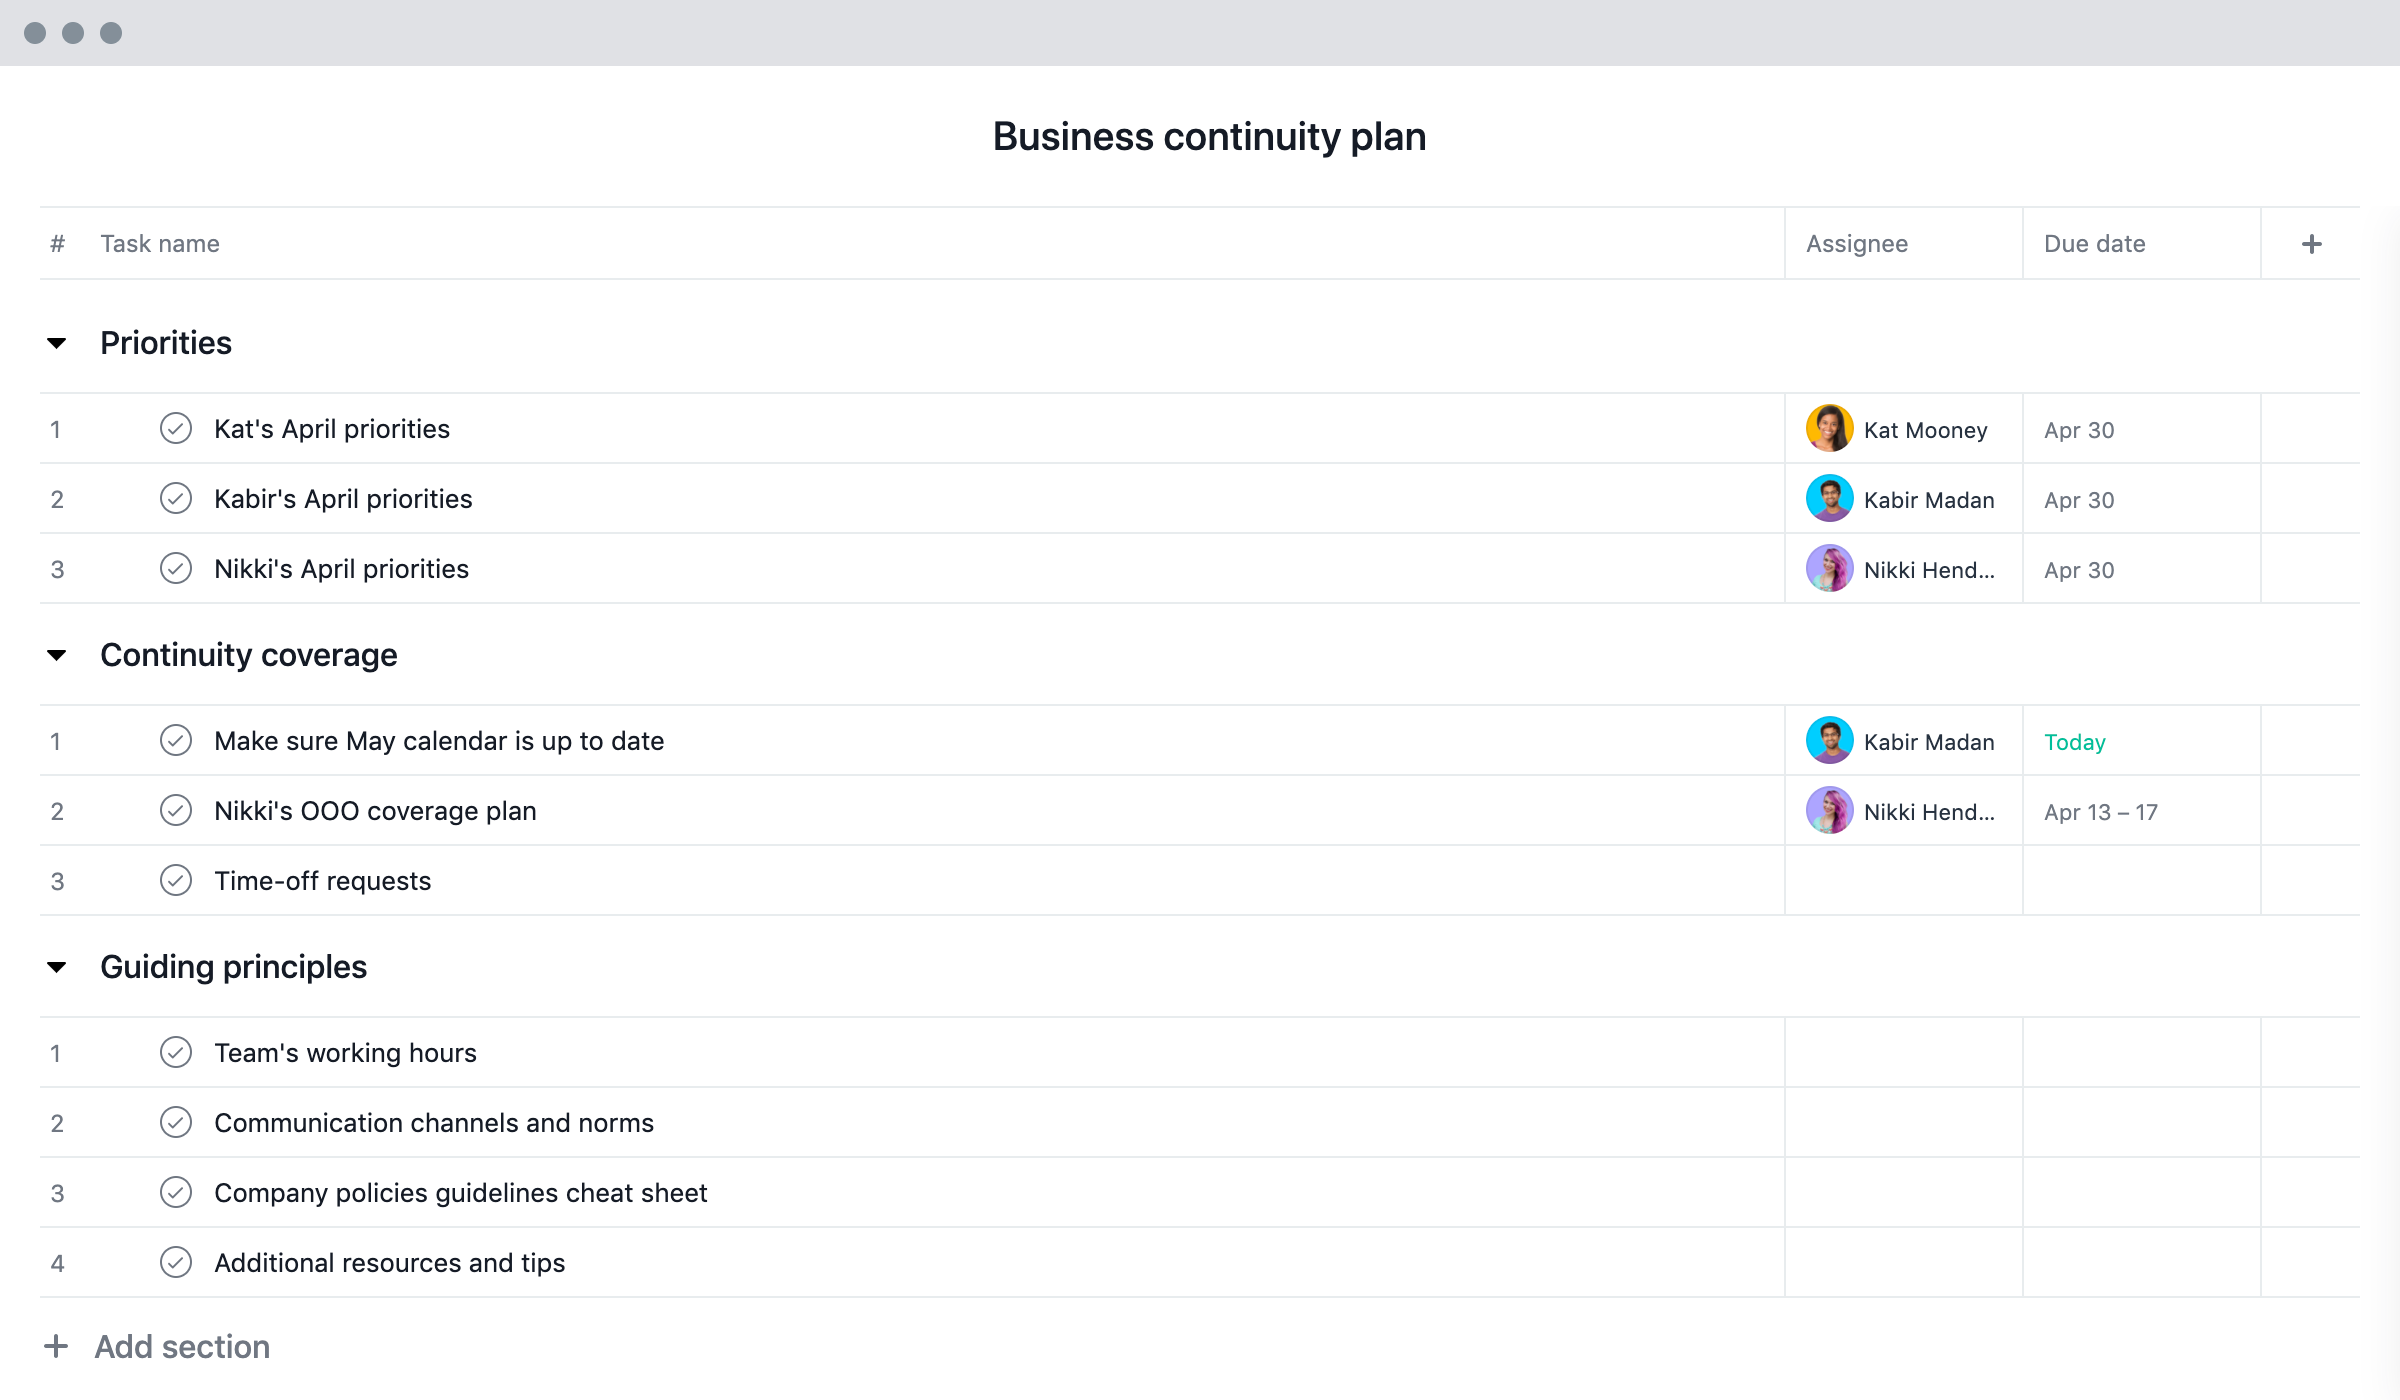 [Product UI] Business continuity plan 